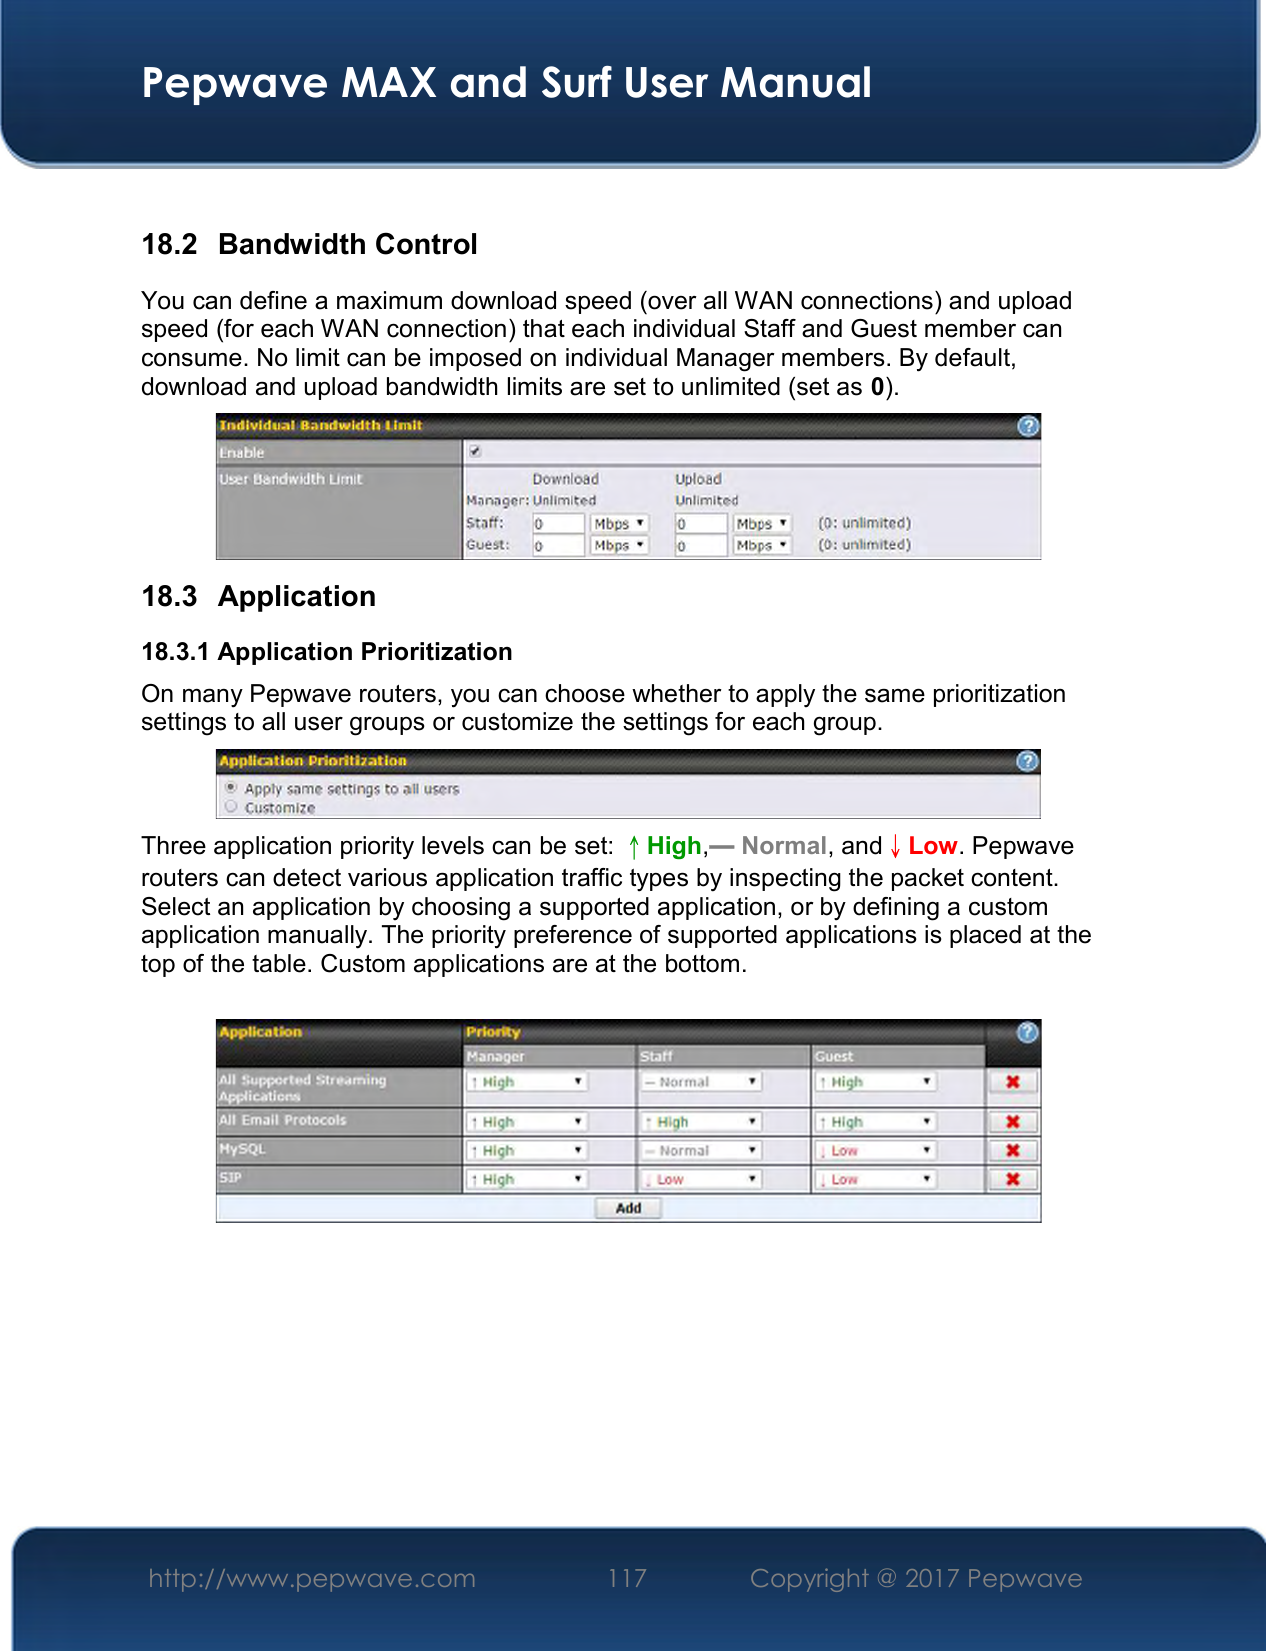  Pepwave MAX and Surf User Manual http://www.pepwave.com  117    Copyright @ 2017 Pepwave    18.2  Bandwidth Control You can define a maximum download speed (over all WAN connections) and upload speed (for each WAN connection) that each individual Staff and Guest member can consume. No limit can be imposed on individual Manager members. By default, download and upload bandwidth limits are set to unlimited (set as 0).  18.3  Application 18.3.1 Application Prioritization On many Pepwave routers, you can choose whether to apply the same prioritization settings to all user groups or customize the settings for each group.   Three application priority levels can be set: ↑High,━ Normal, and↓Low. Pepwave routers can detect various application traffic types by inspecting the packet content. Select an application by choosing a supported application, or by defining a custom application manually. The priority preference of supported applications is placed at the top of the table. Custom applications are at the bottom.       